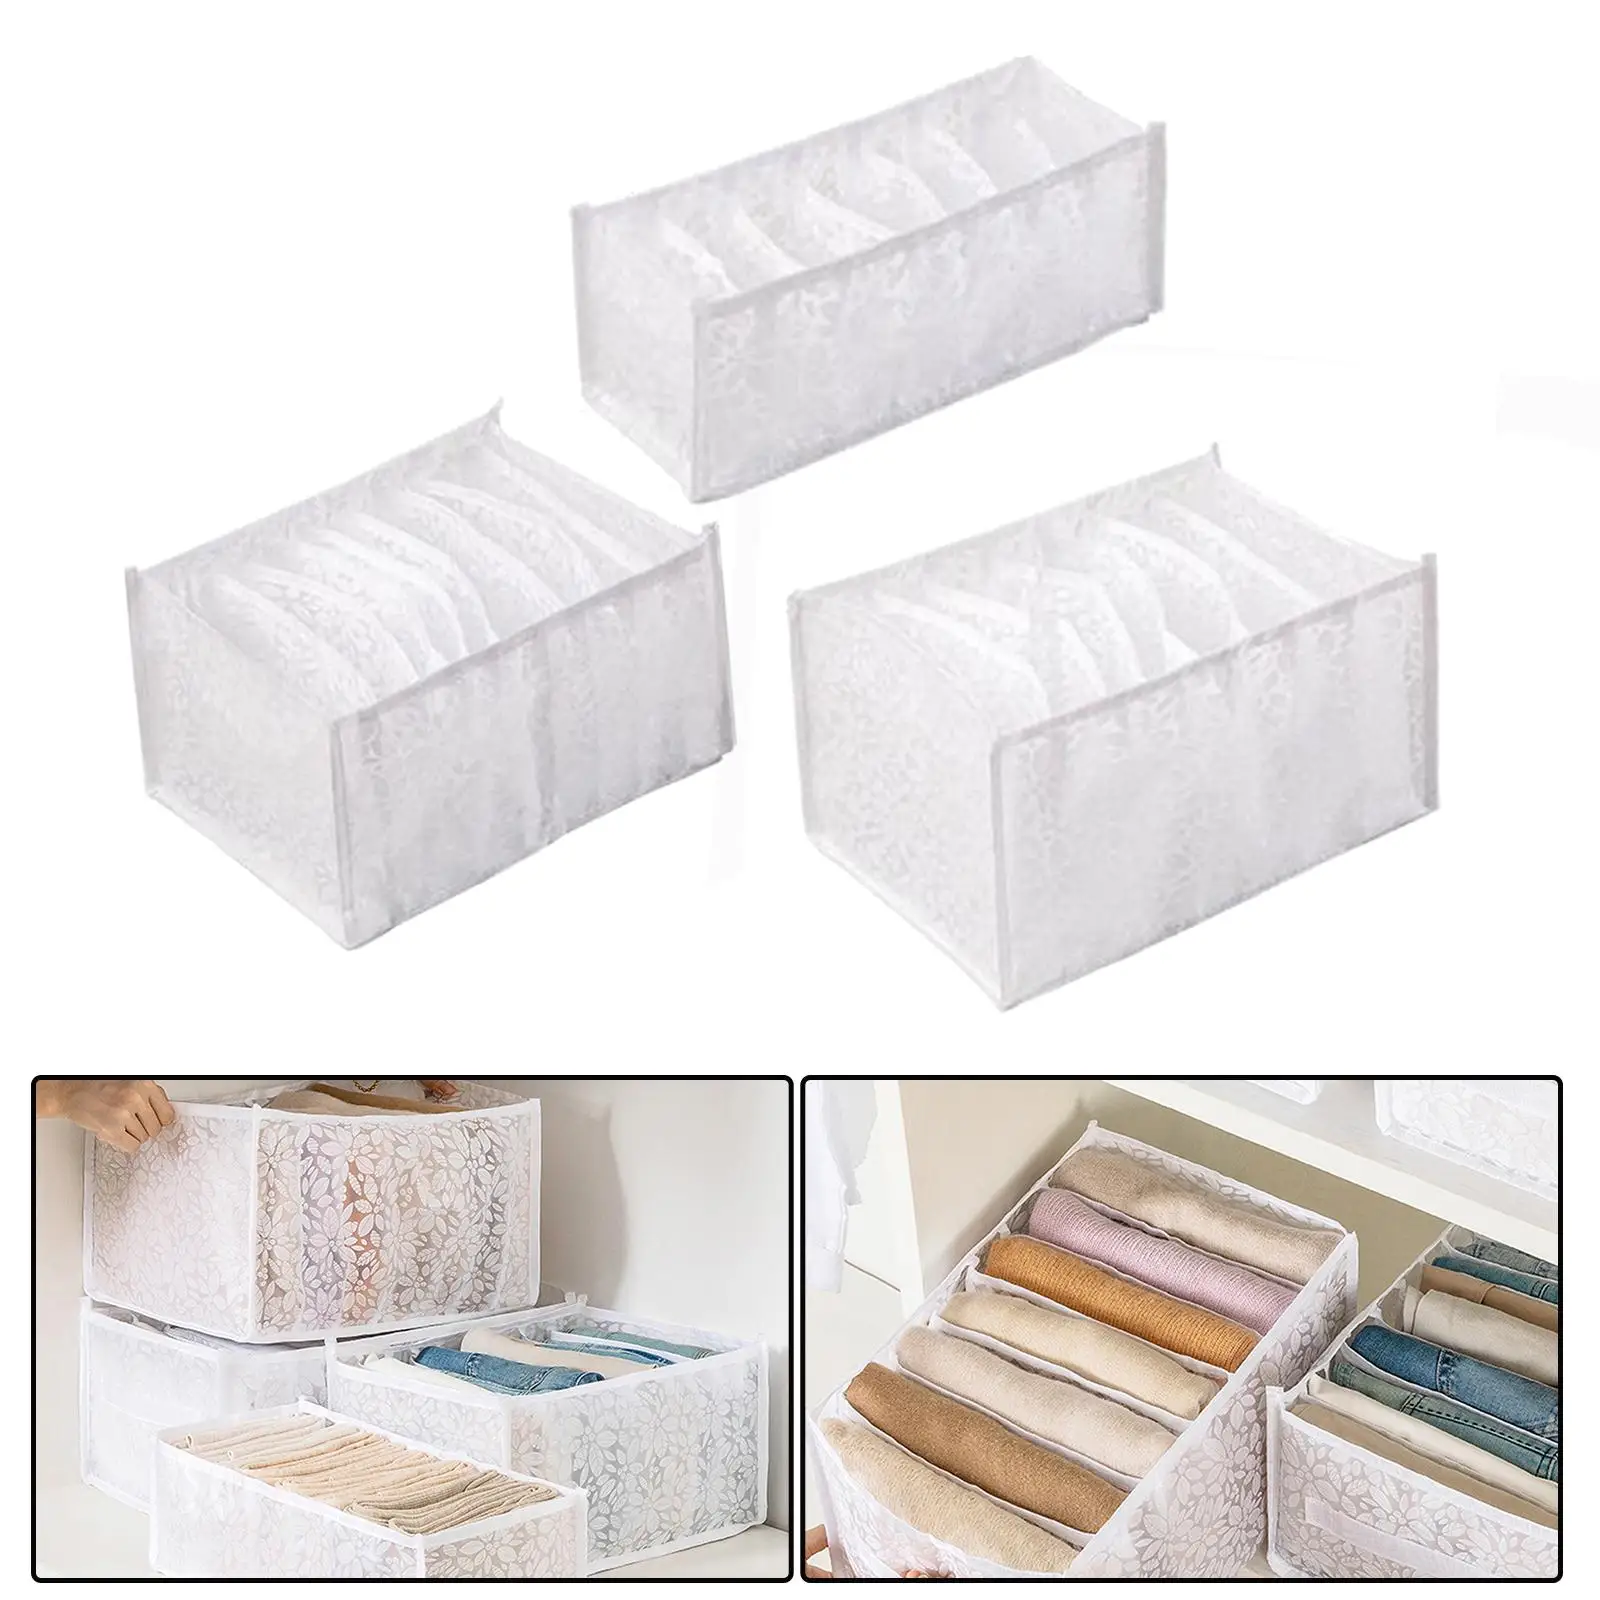 Clothes Storage Boxes with Compartments Stackable Portable Closet Organizer for Clothing Storage Underwear Skirts Bra Bedroom